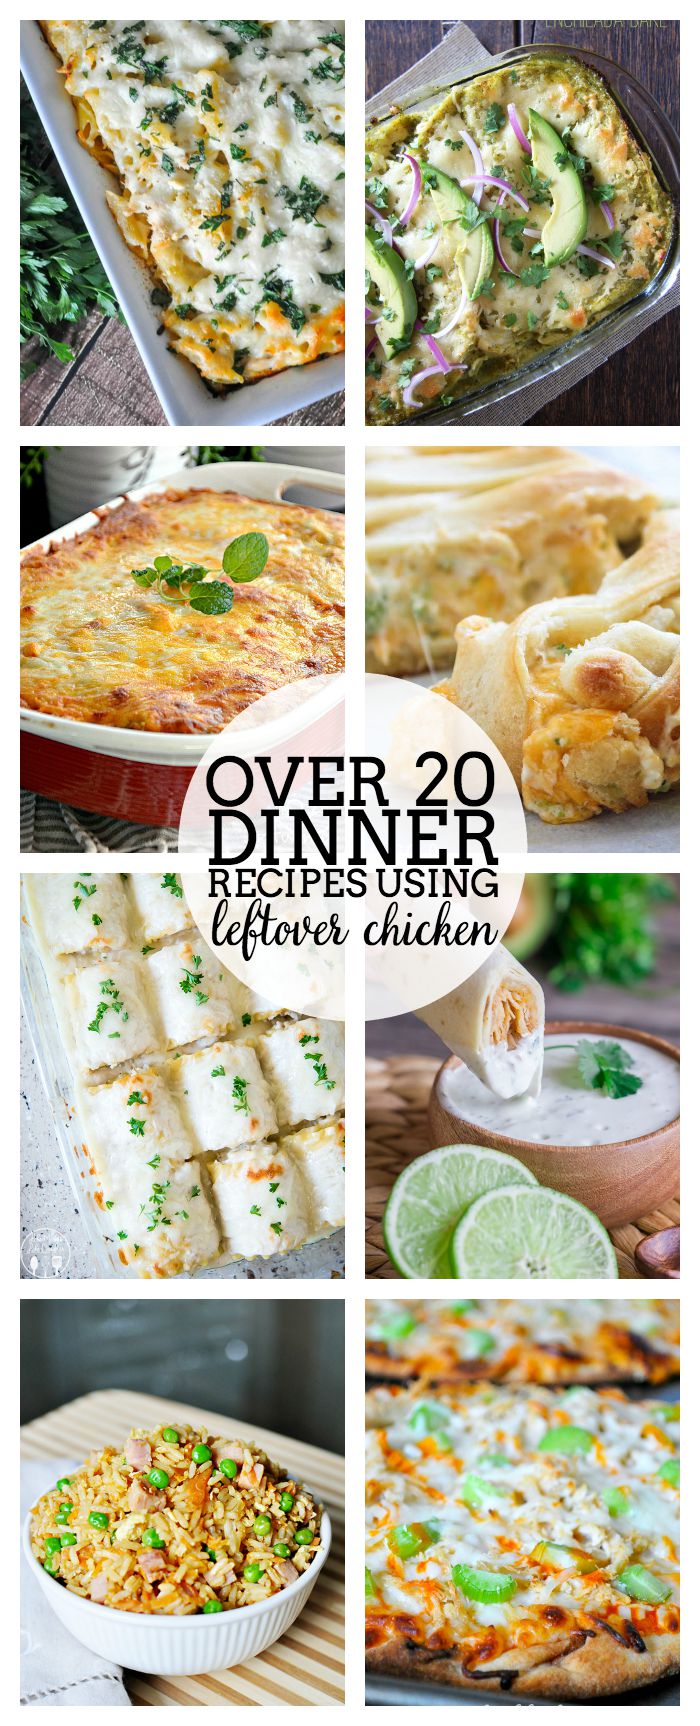 Make good use of your grocery budget and your time with these Leftover Chicken Recipes that are perfect for weeknight dinners! | The Love Nerds